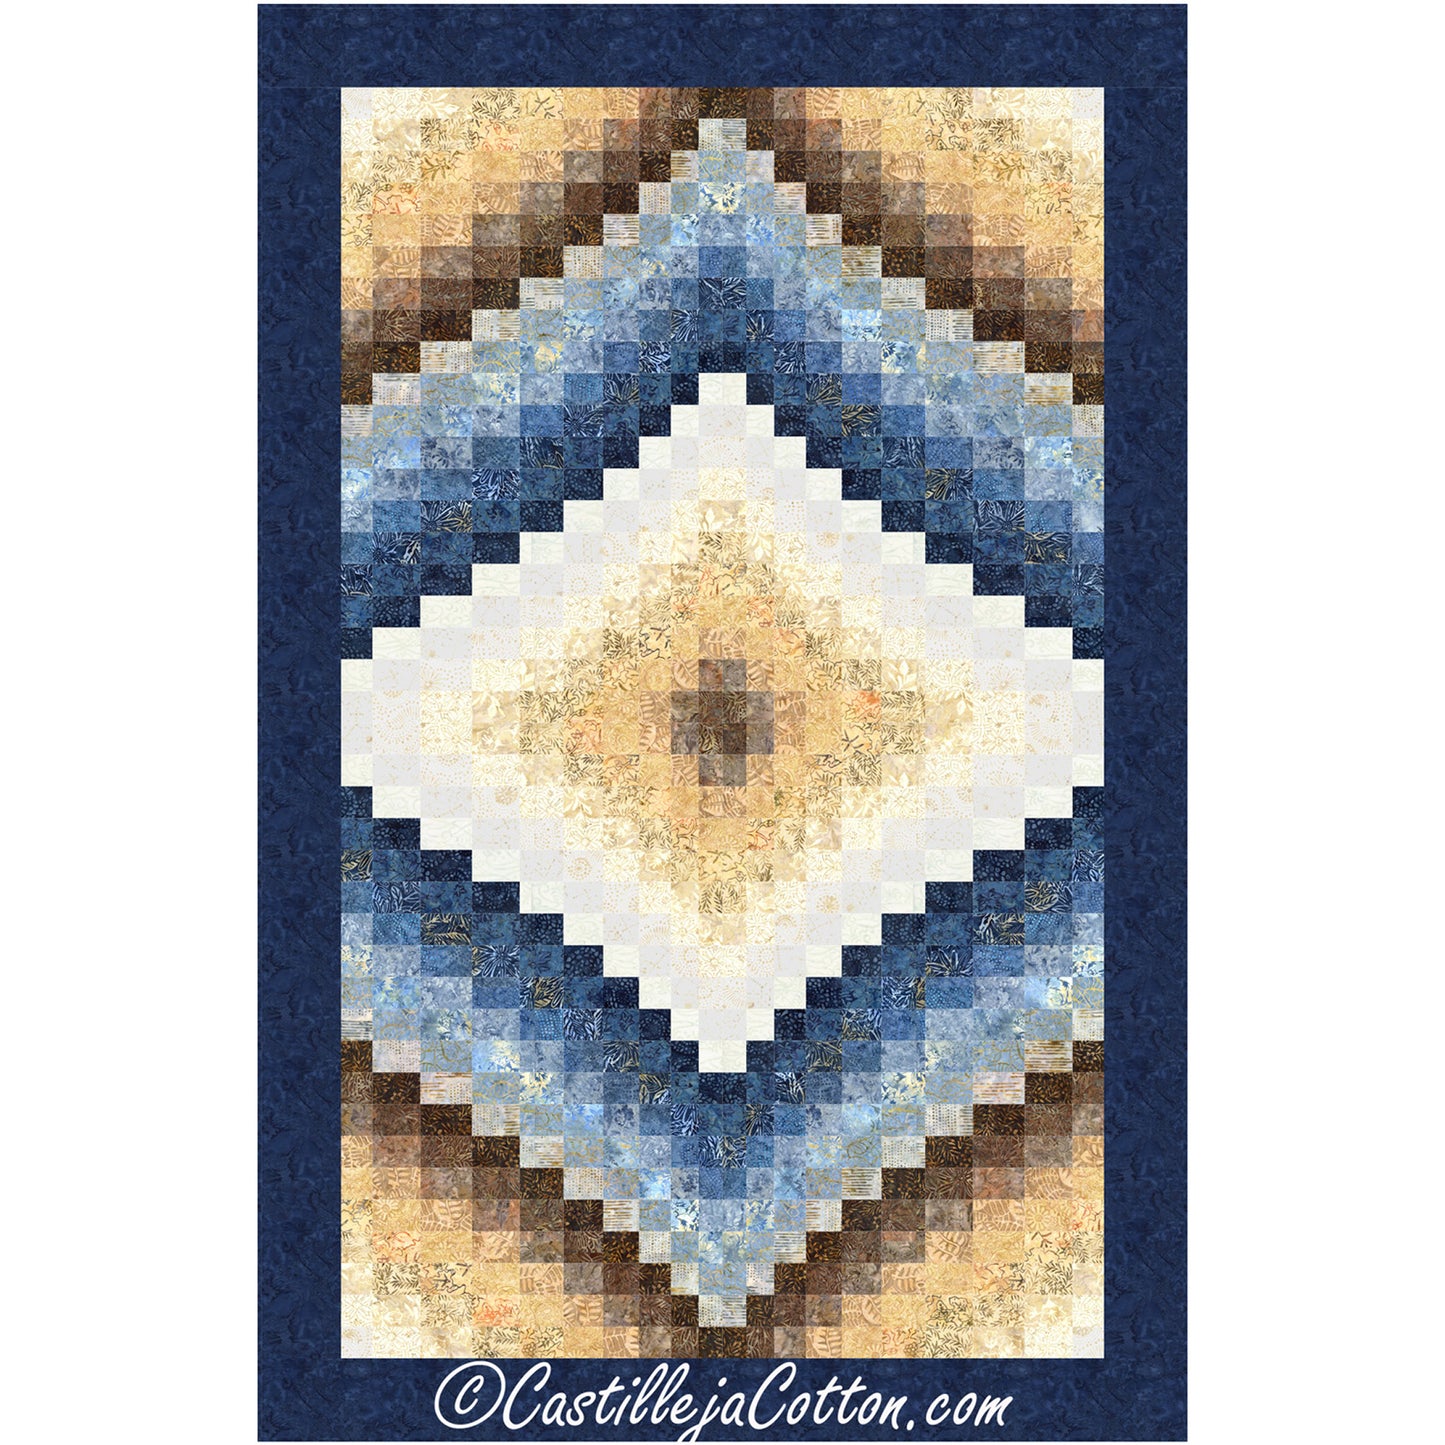 Beautiful quilt showcasing a beautiful design in blue, white, and brown colors.